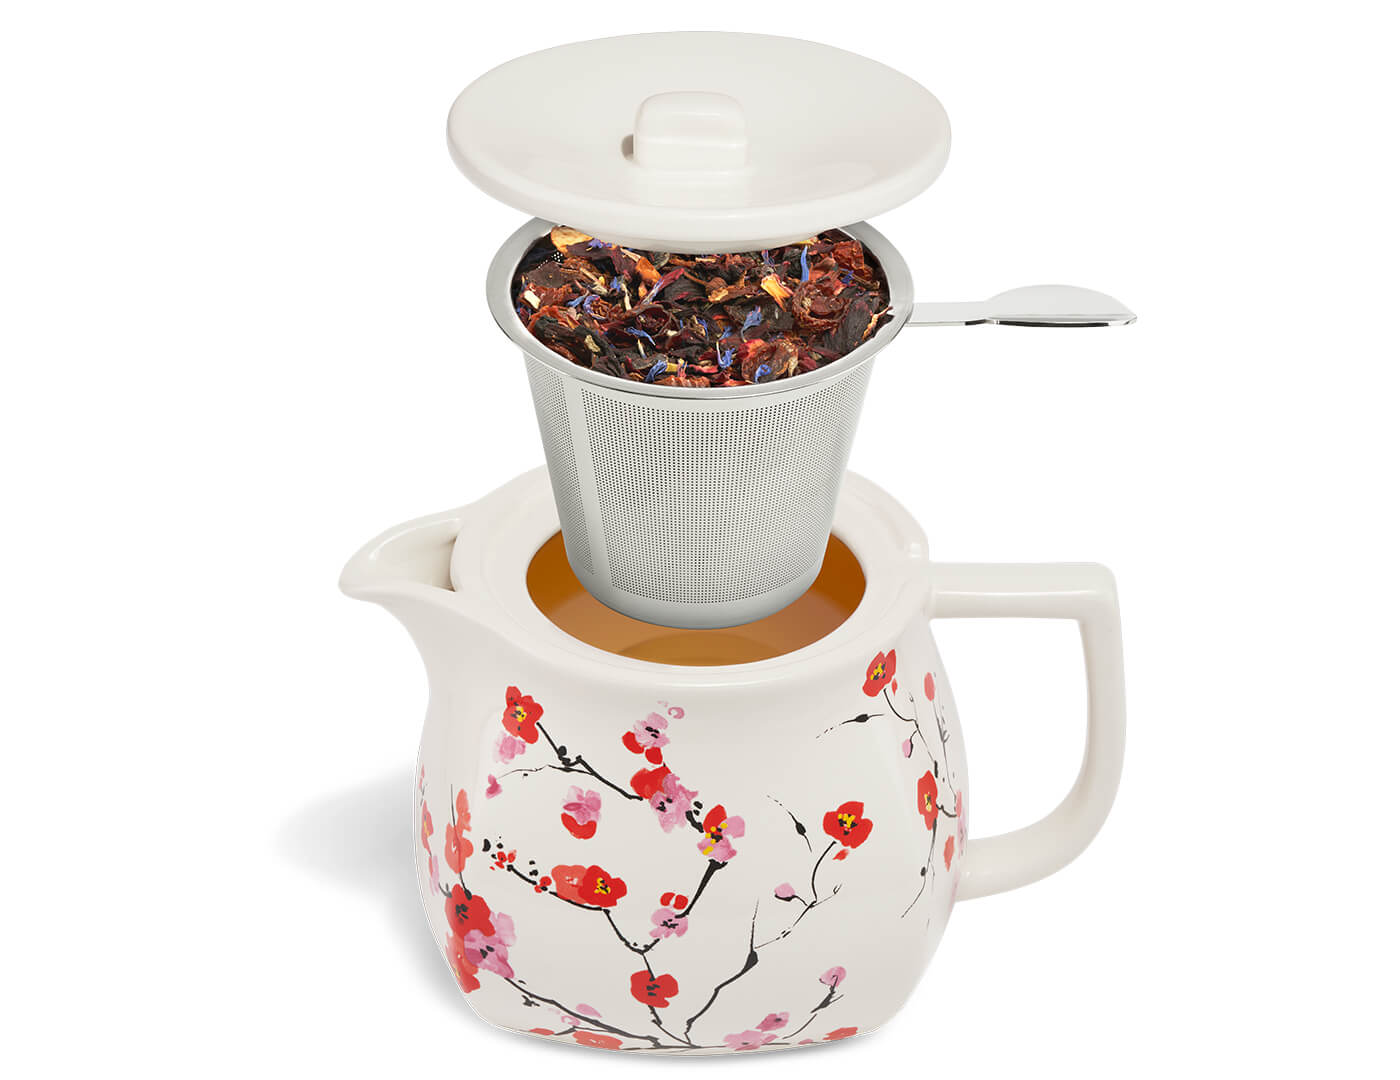 How to use the Fiore Sakura Teapot with lid and infuser